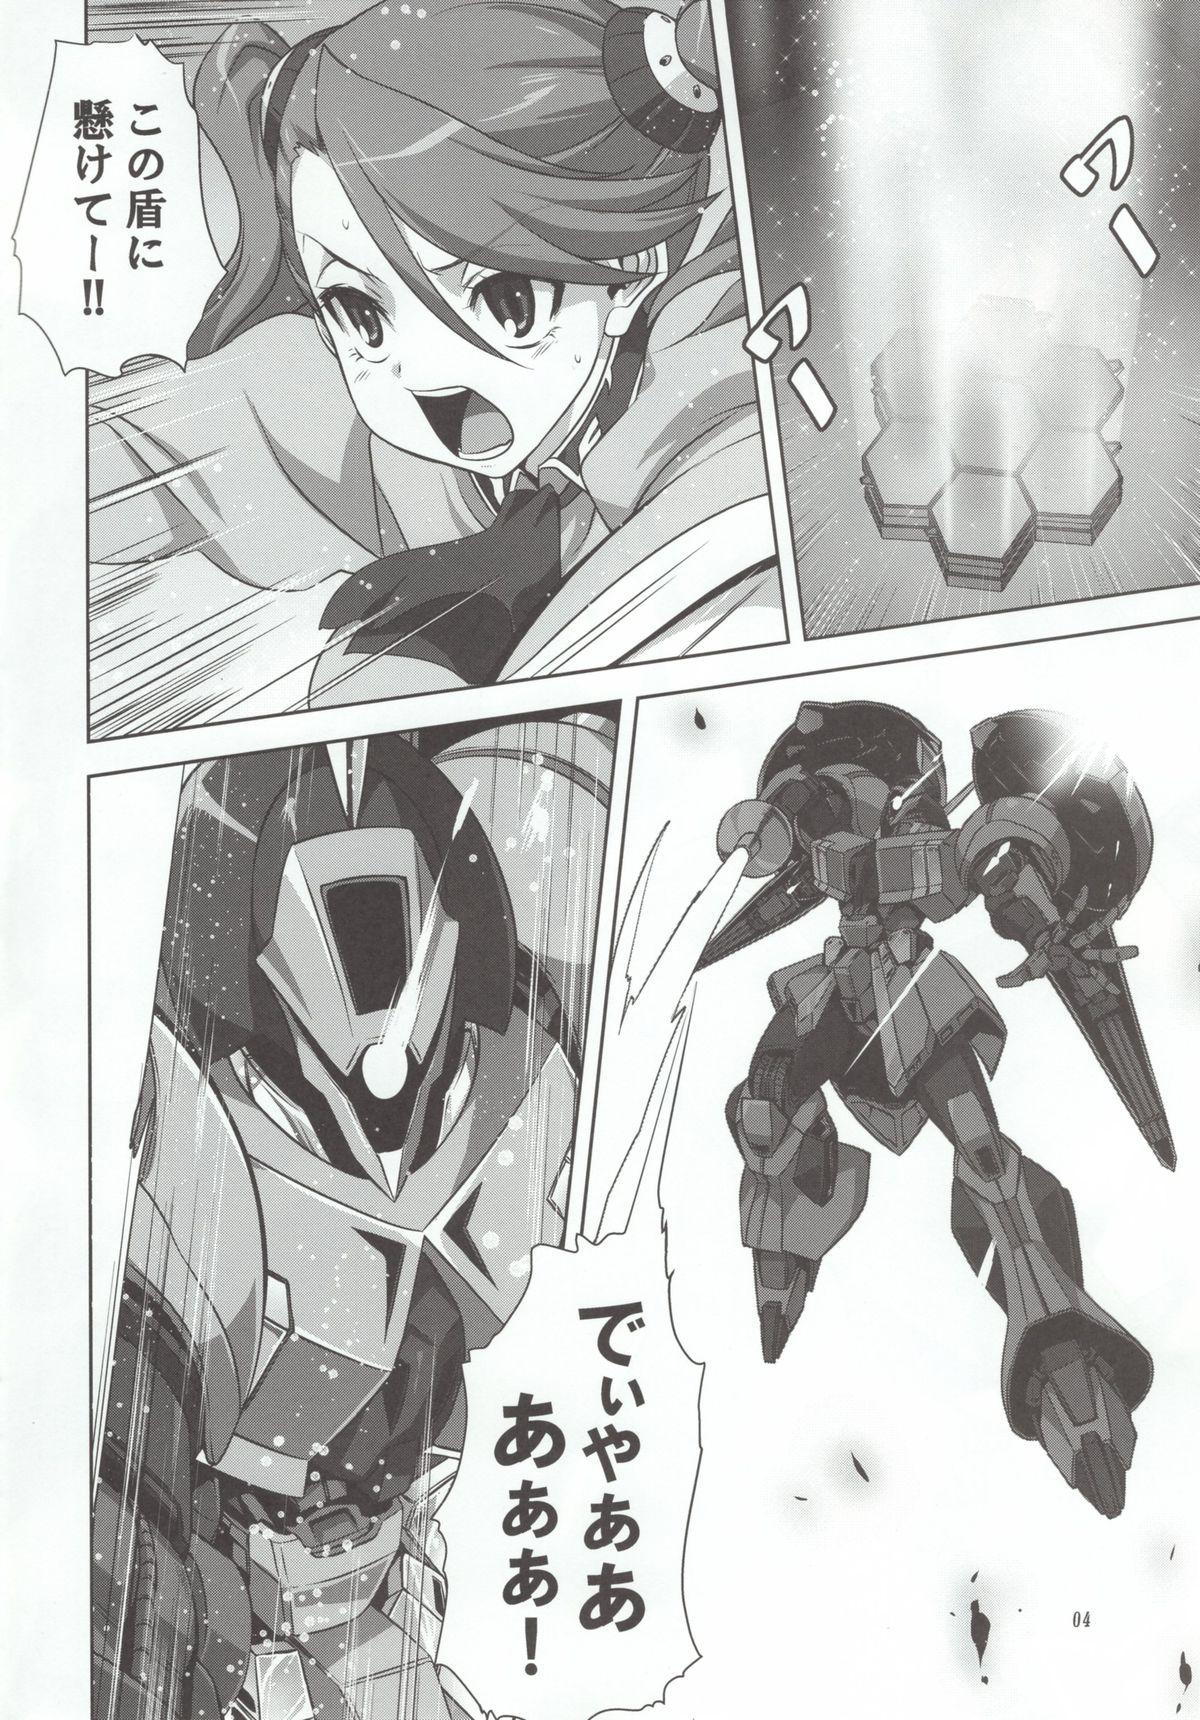 Pain Try Fight! - Gundam build fighters try Amateur - Page 4